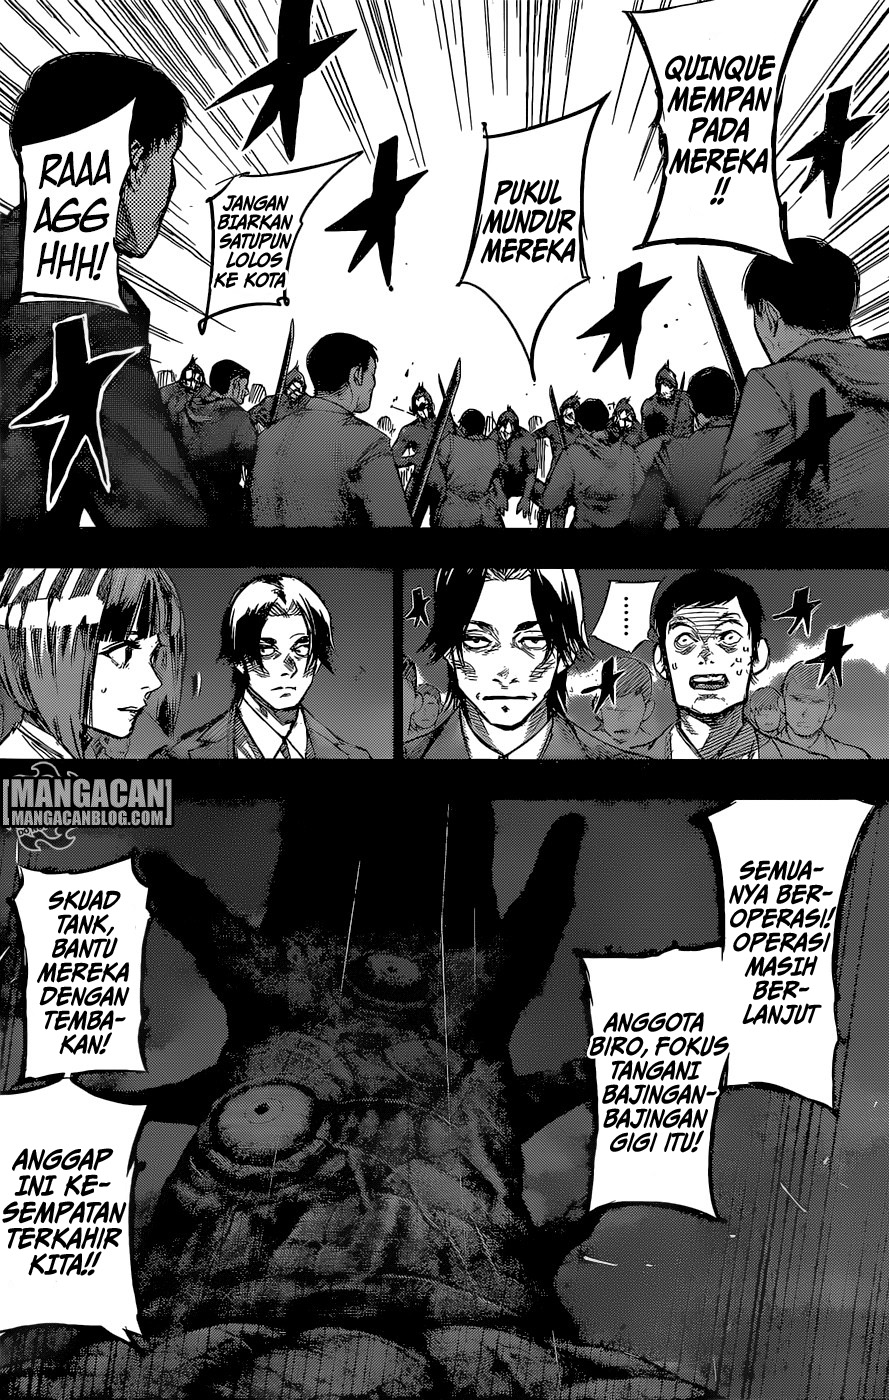 Tokyo Ghoul:re Chapter 153